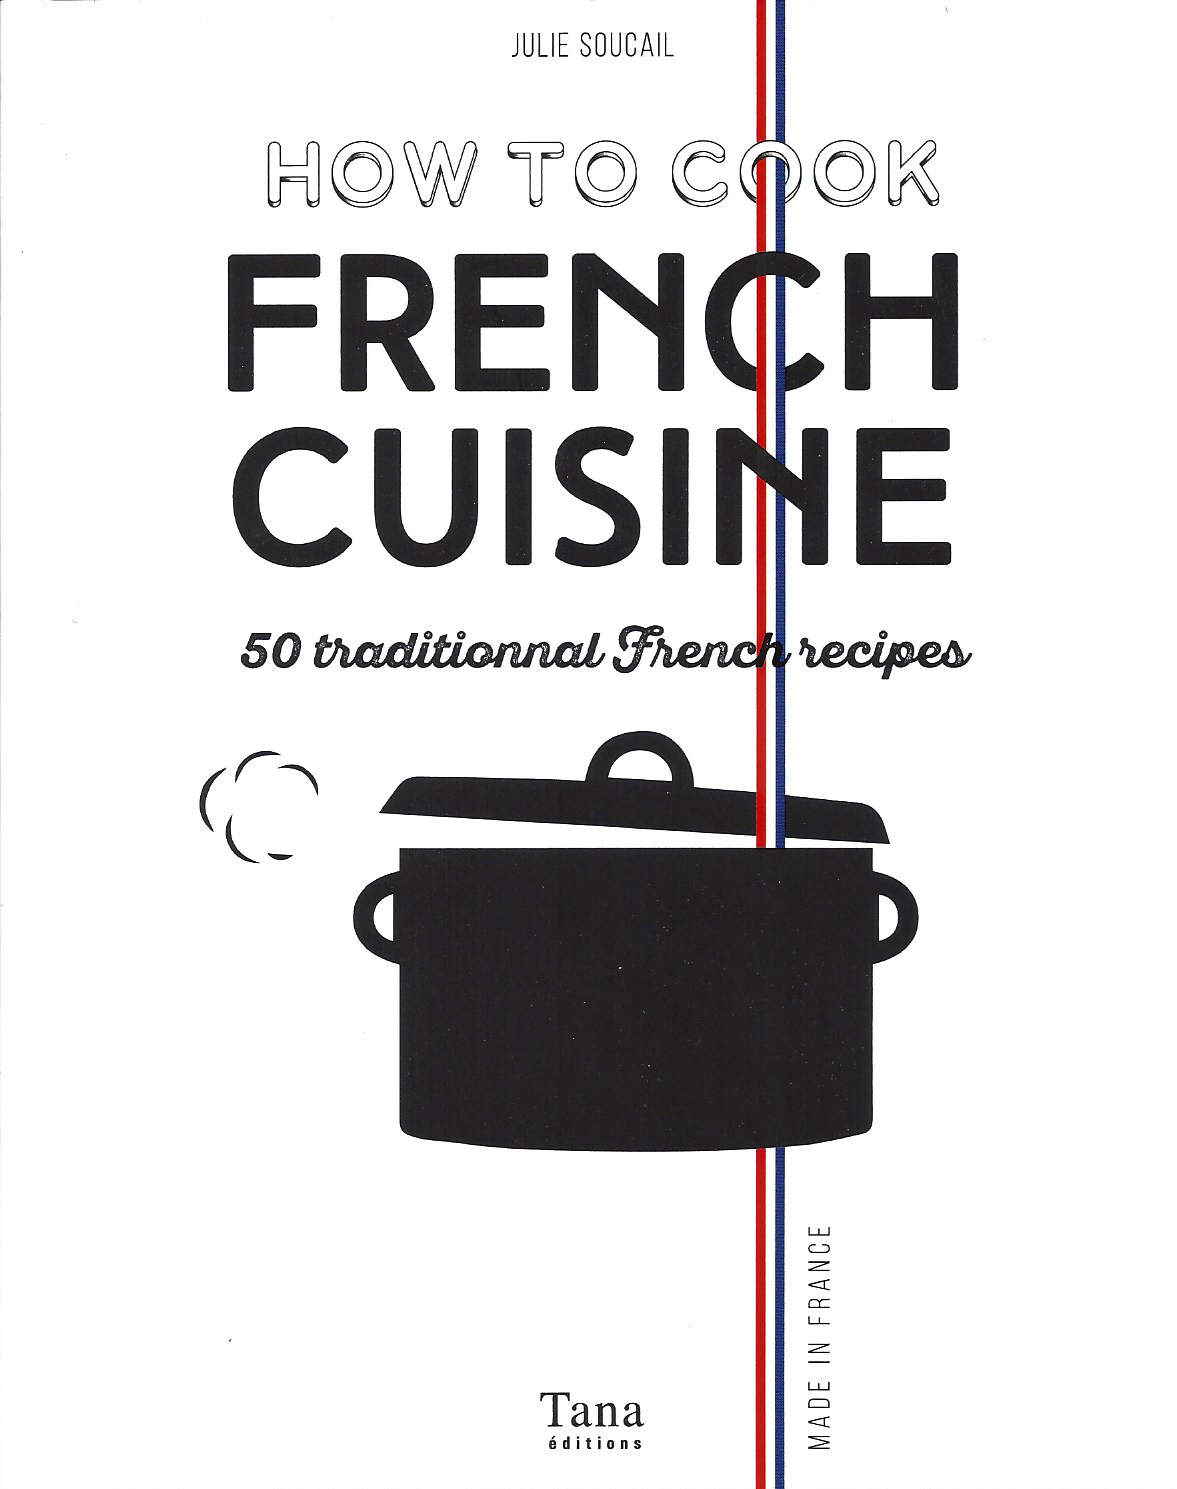 How to Cook French Cuisine (2)